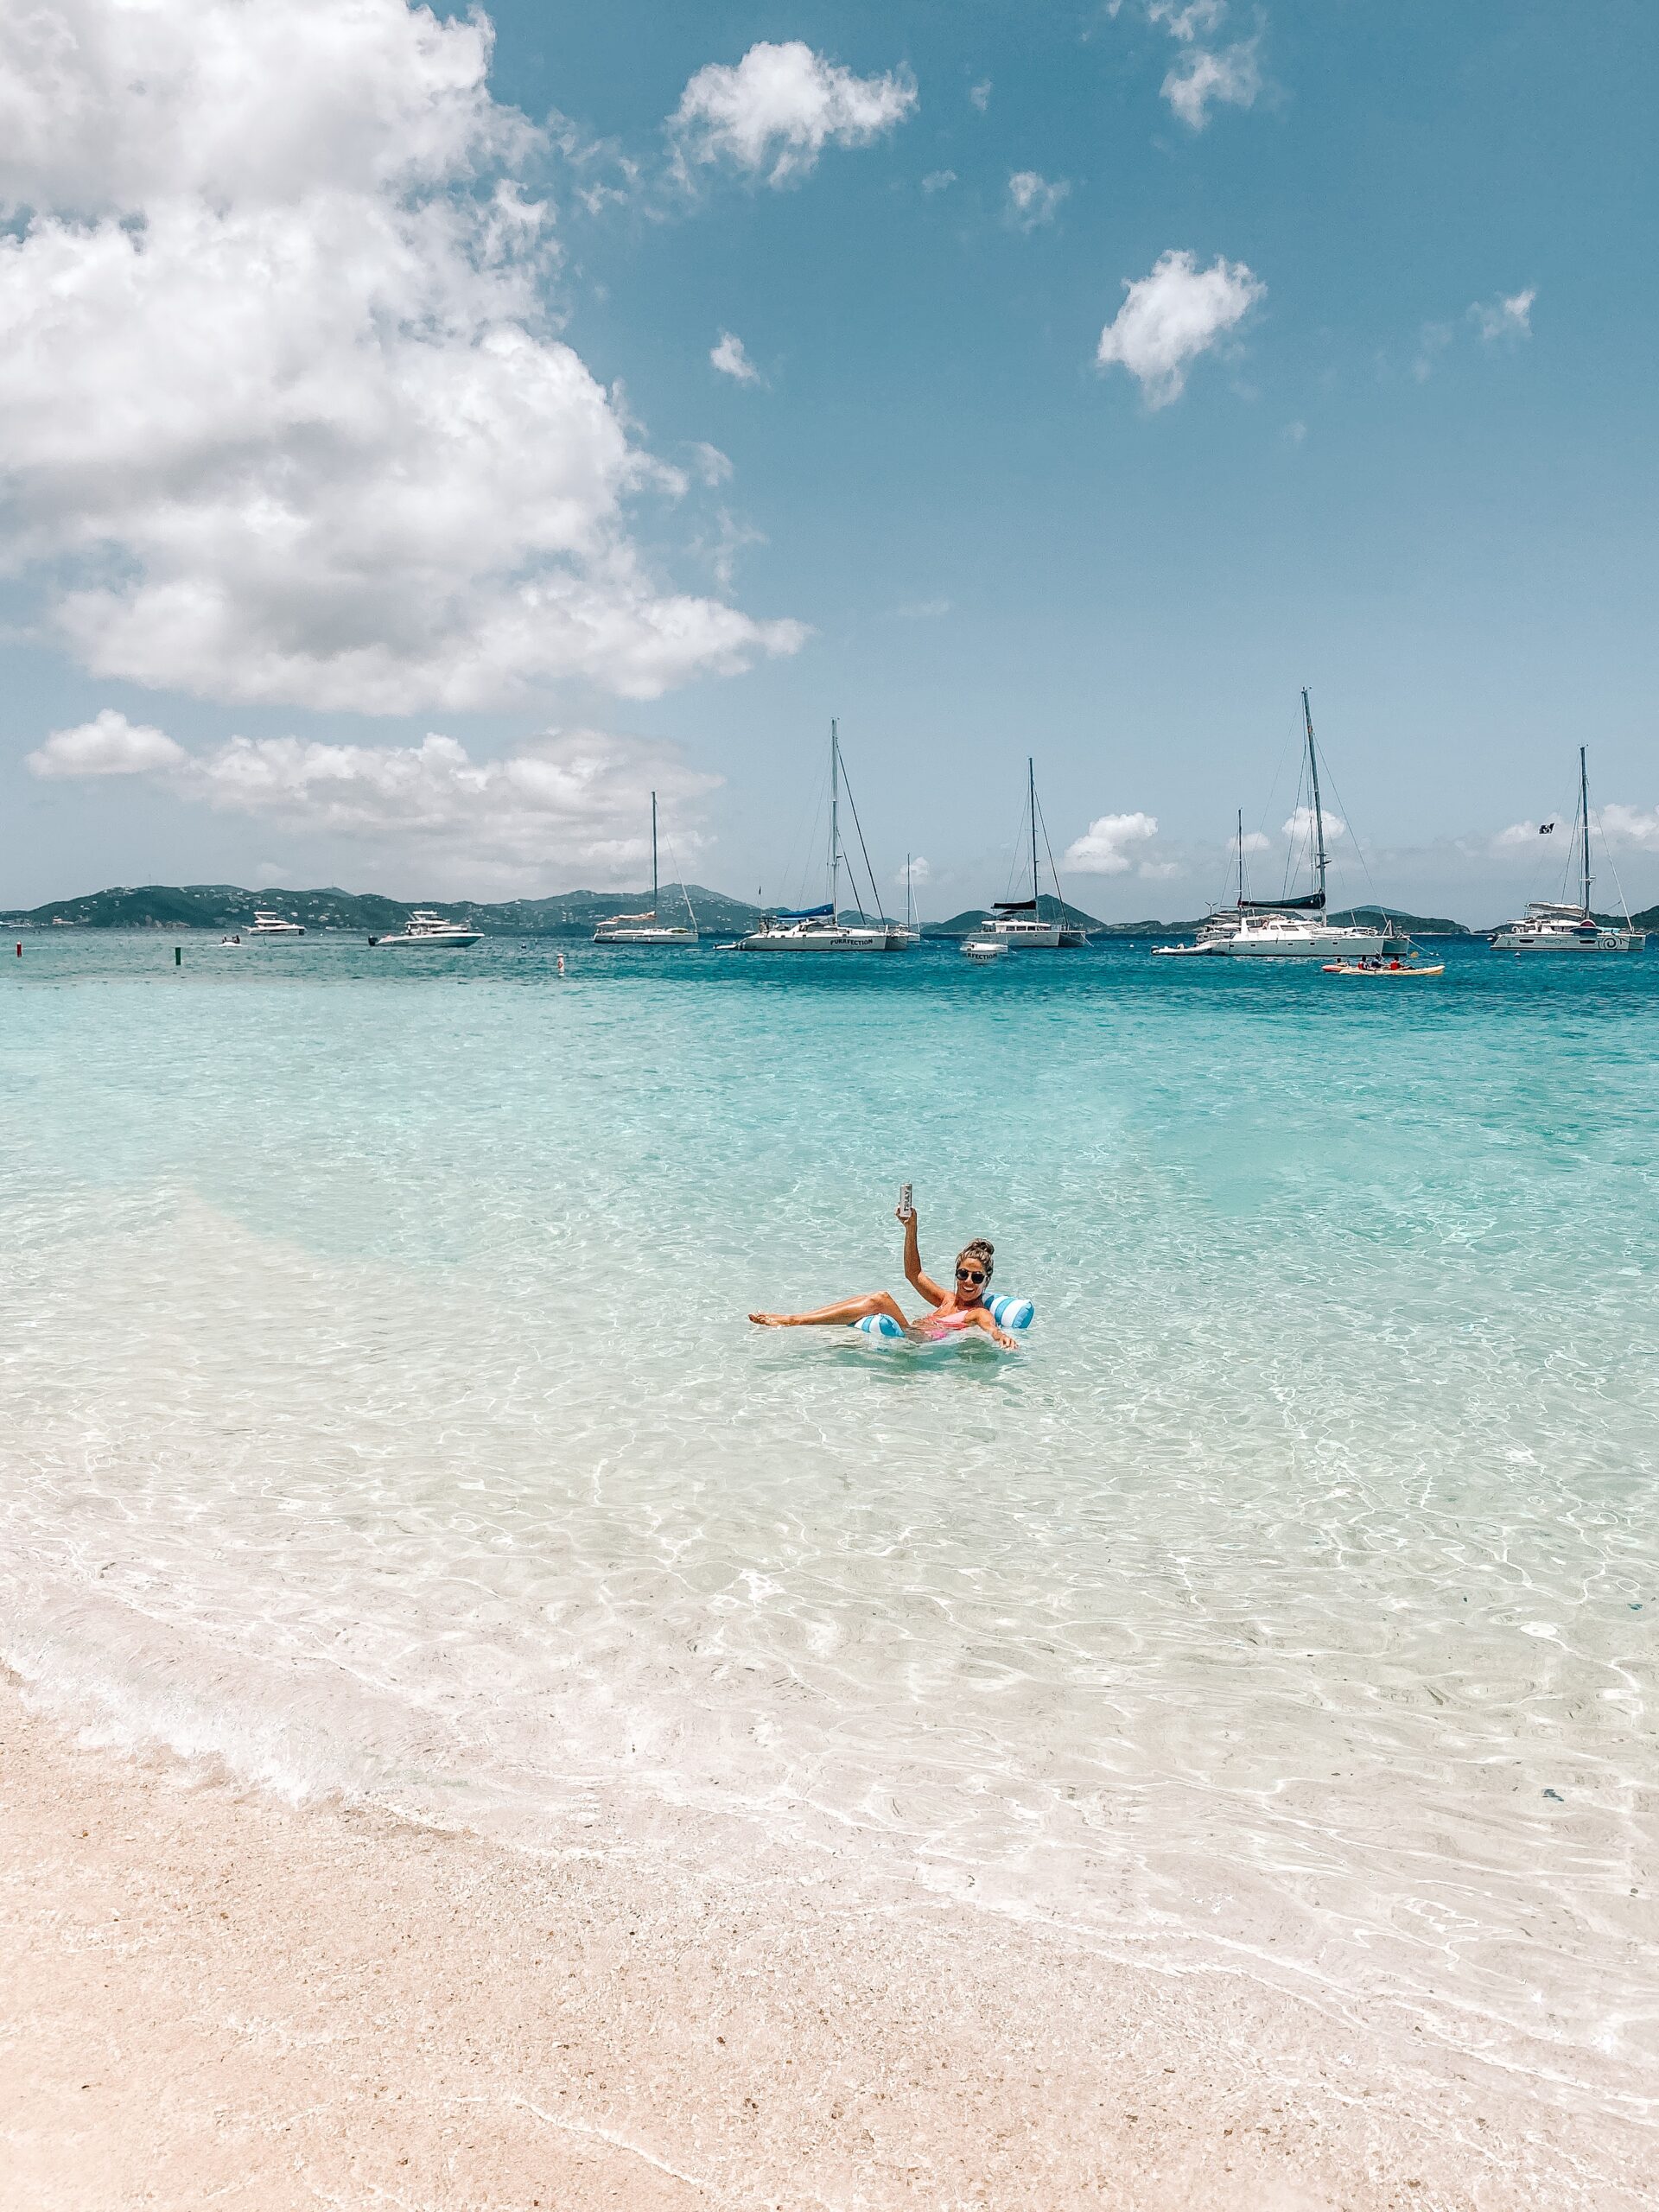 Looking to book a trip to St. John, USVI? Life and style blogger Lauren McBride shares her family's recommendations.